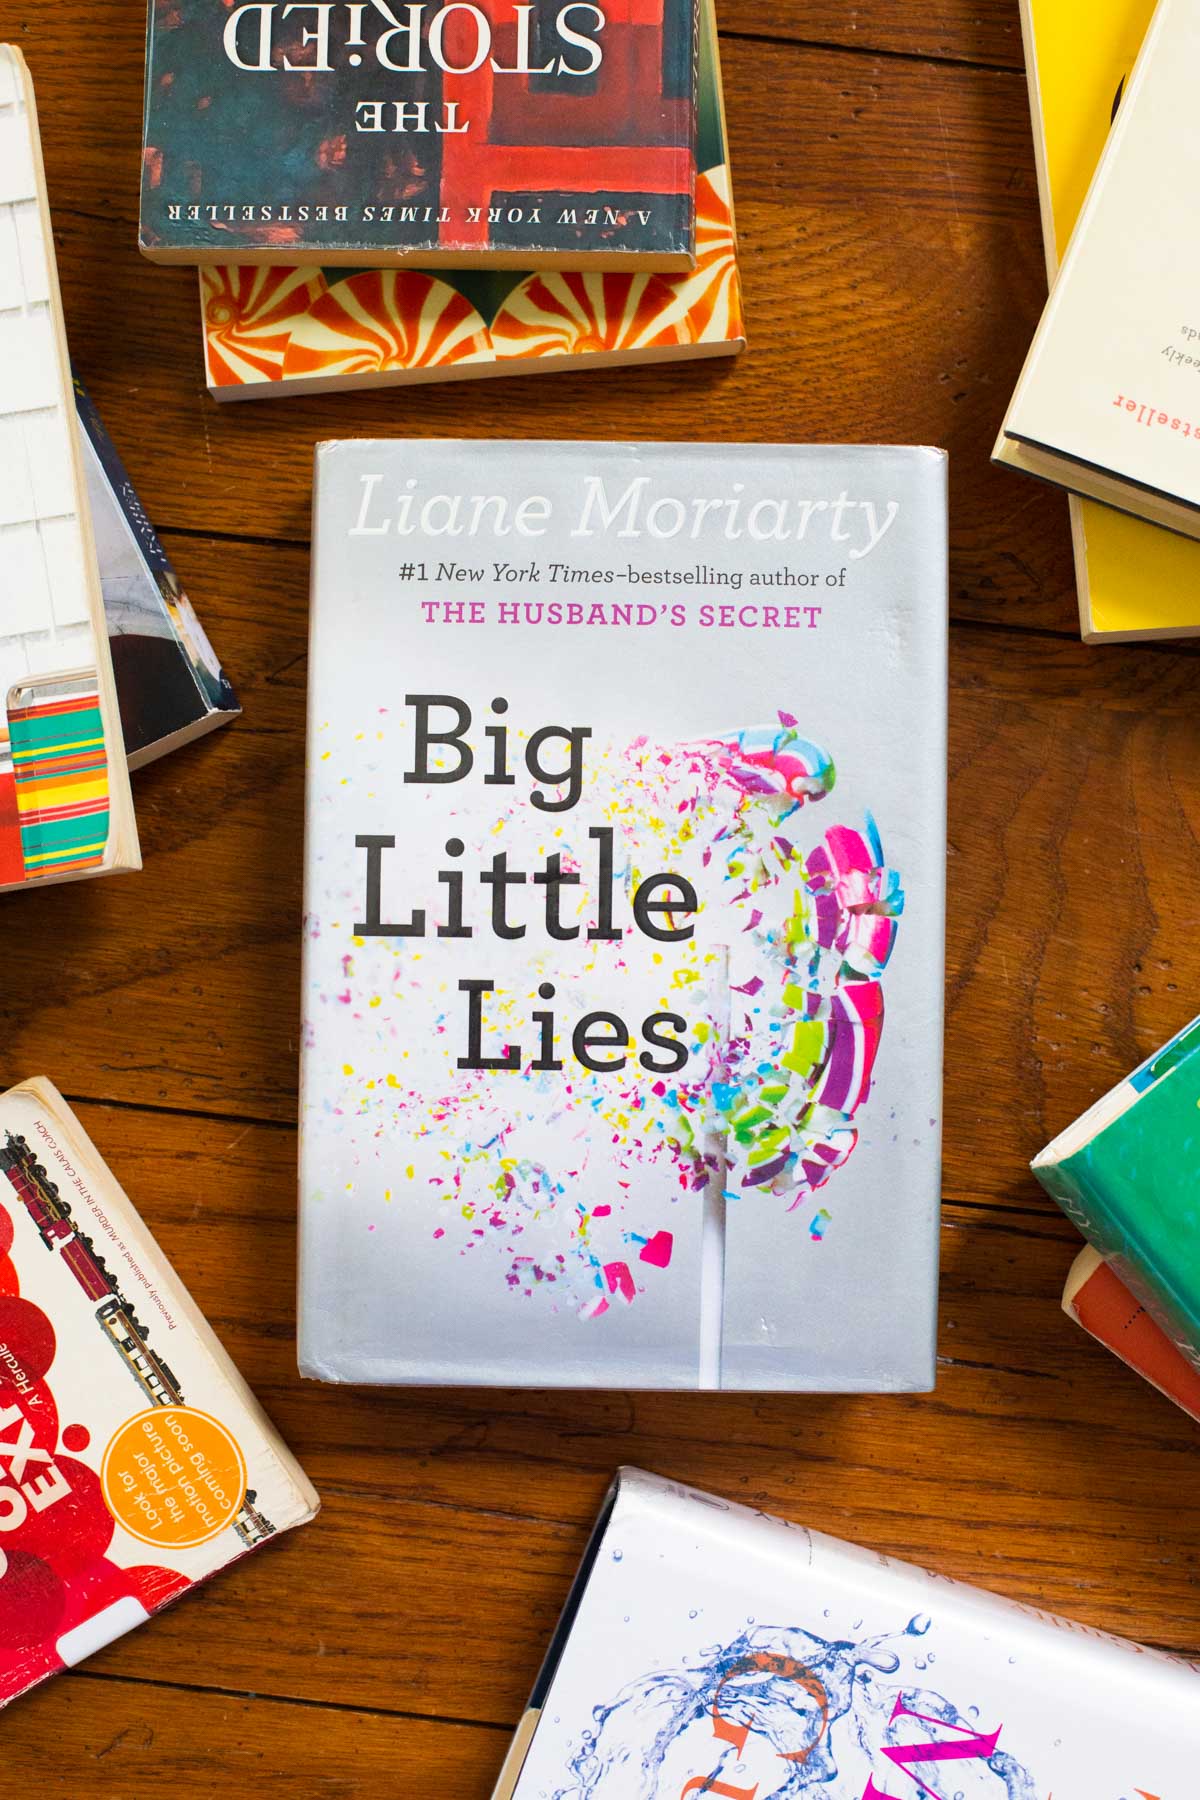 A copy of Big Little Lies is on a table surrounded by other books.